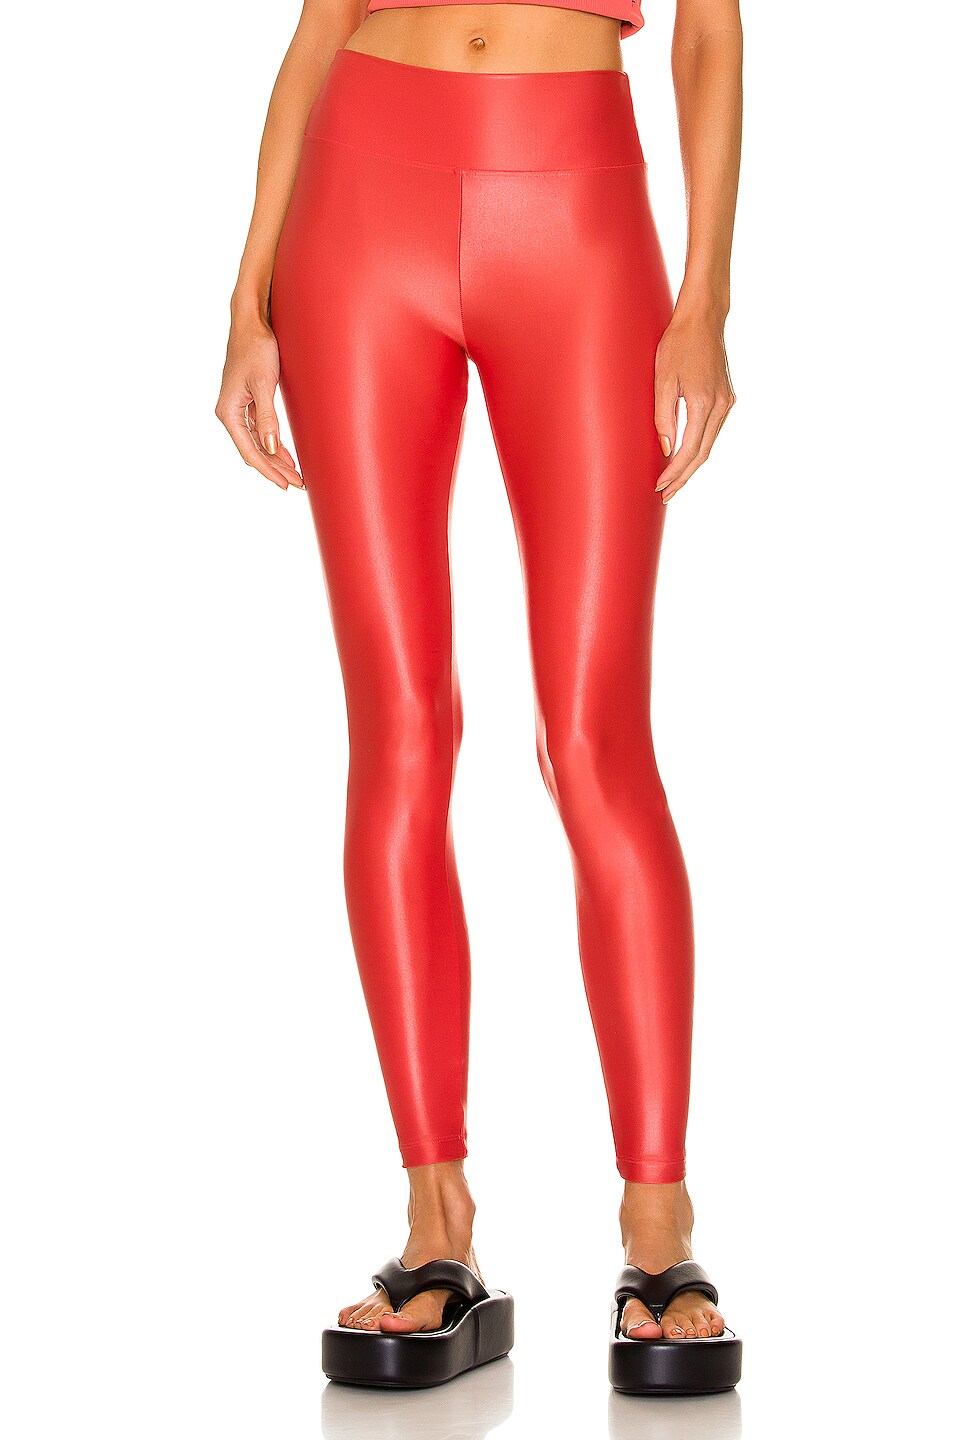 Image 1 of KORAL Lustrous Max High Rise Infinity Legging in Spicy Isle